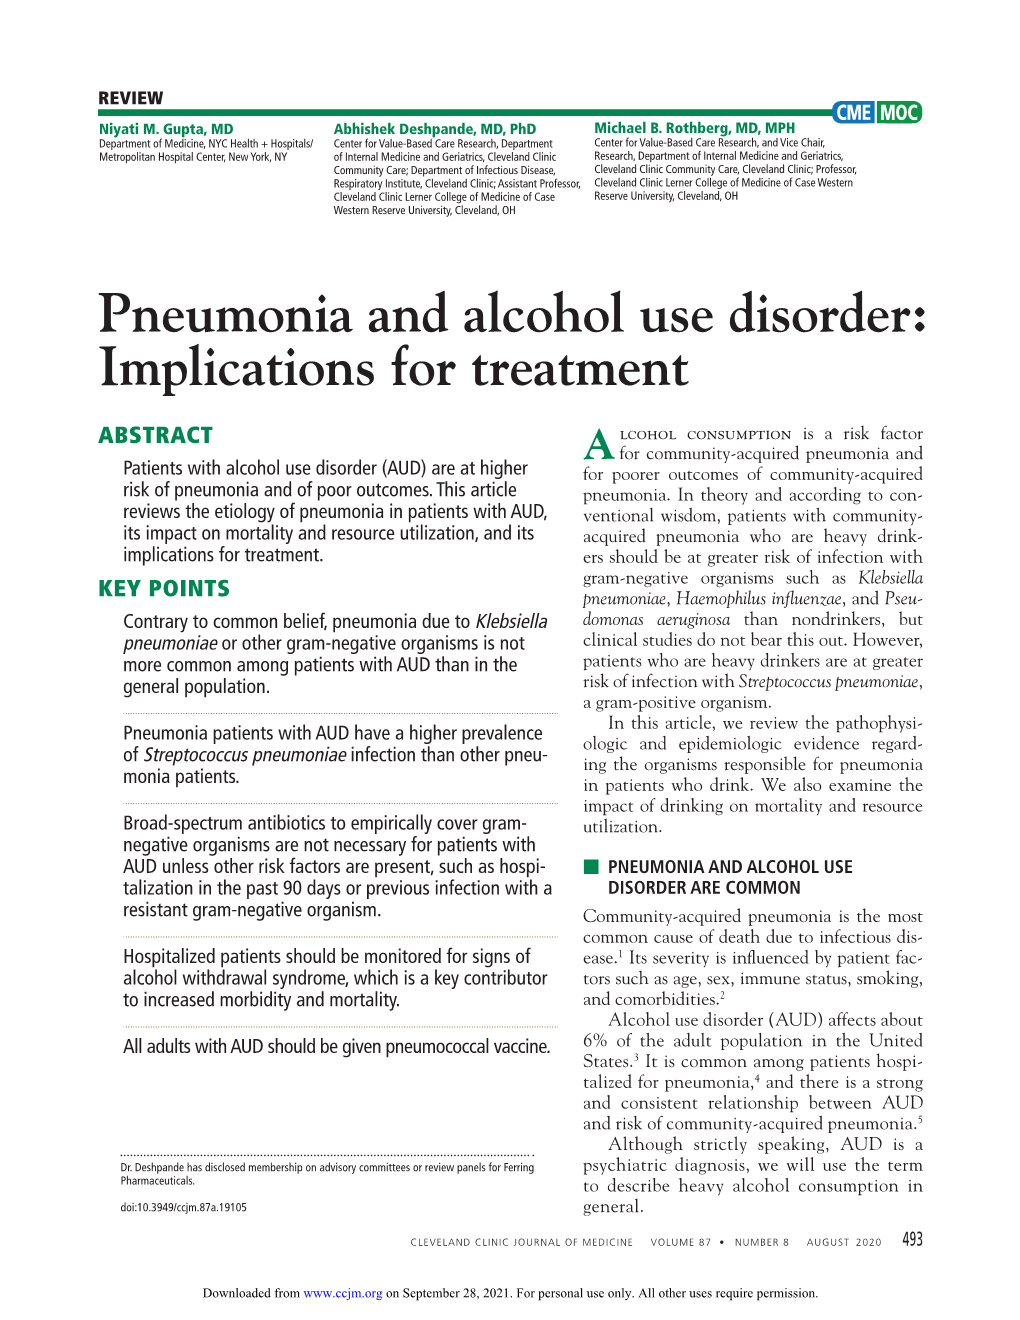 Pneumonia and Alcohol Use Disorder: Implications for Treatment